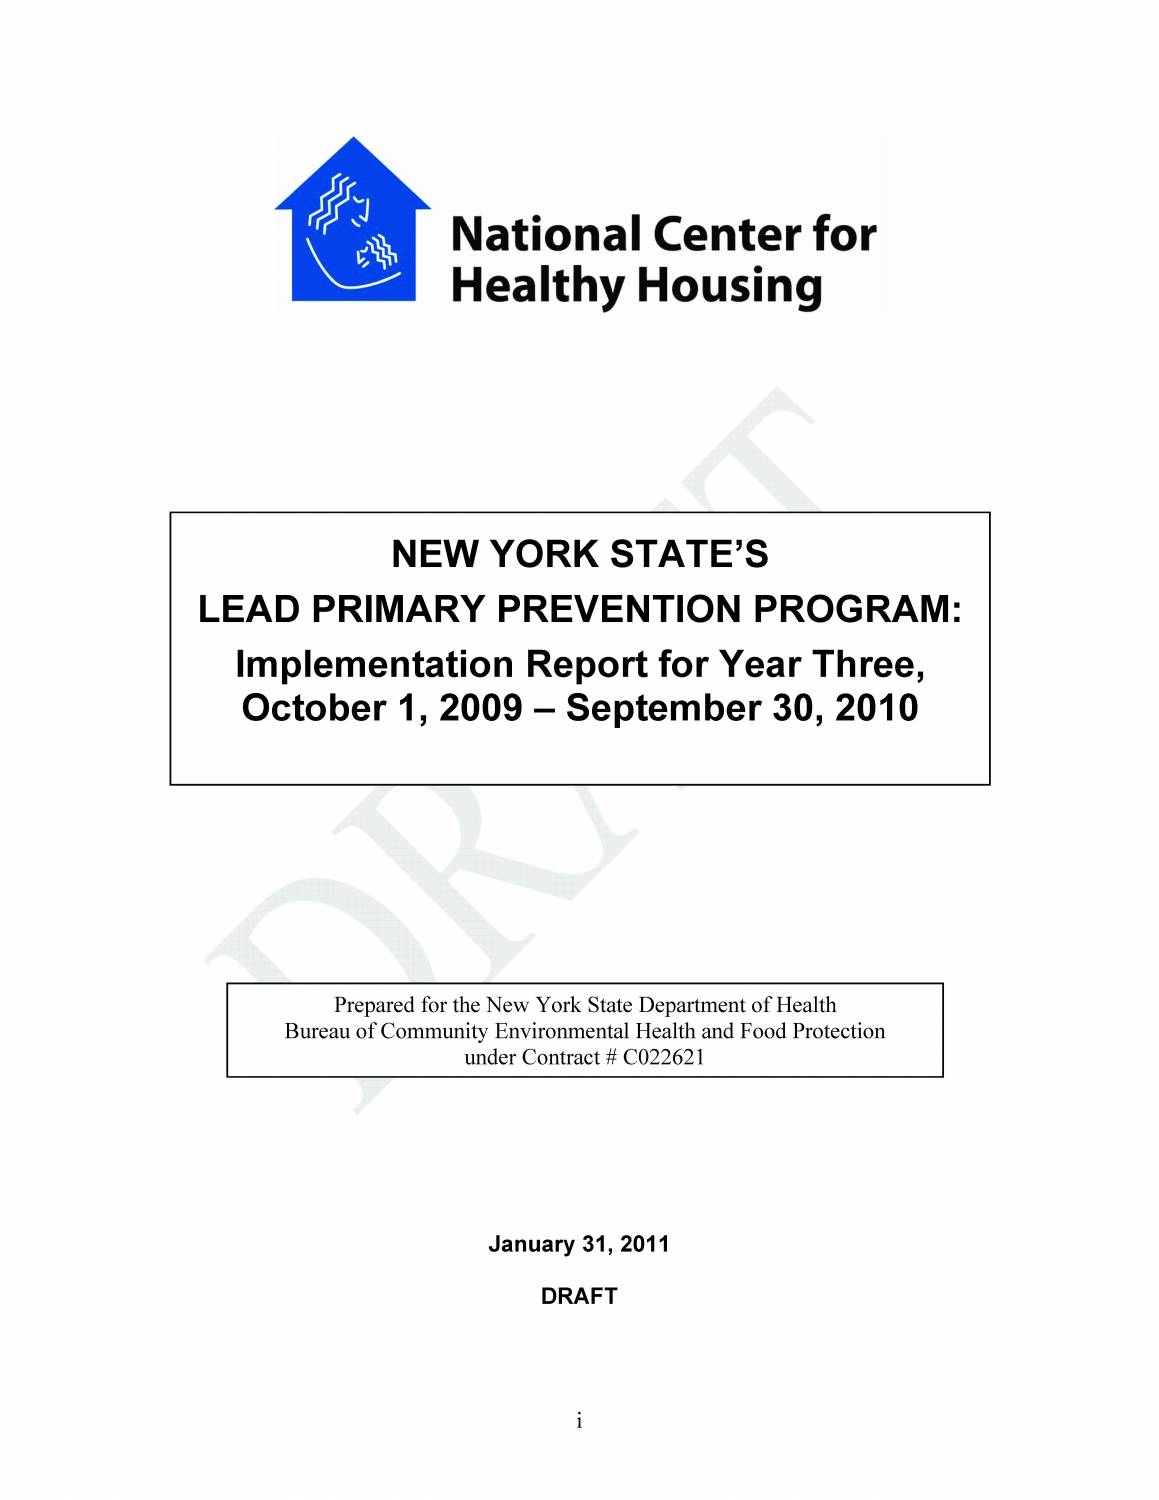 New York State's Lead Primary prevention Program: Implementation Report for Year Three, October 1, 2009 - September 30, 2010